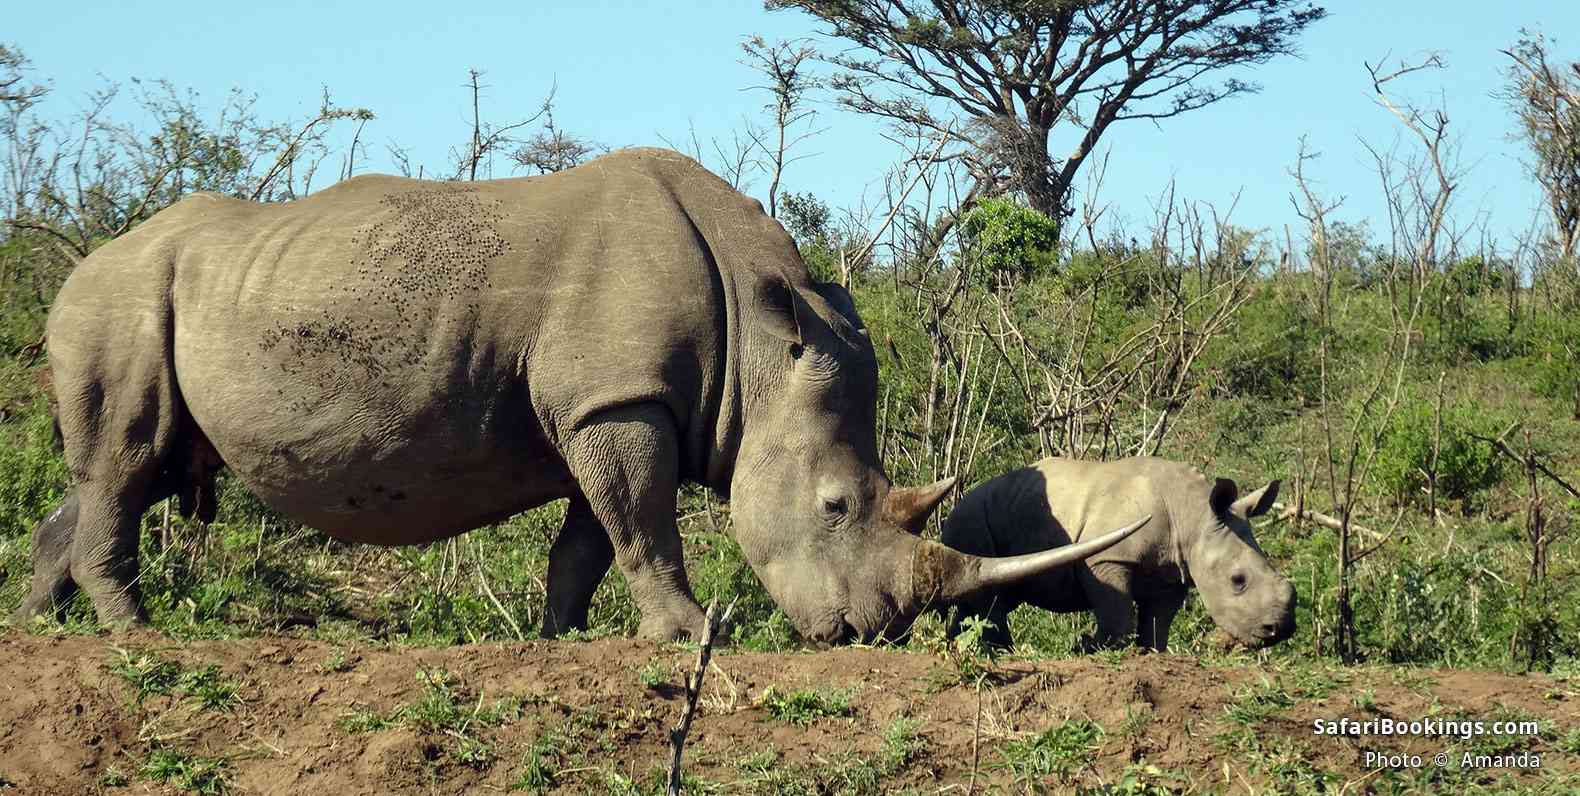 Rhino and baby at Hluhluwe Park